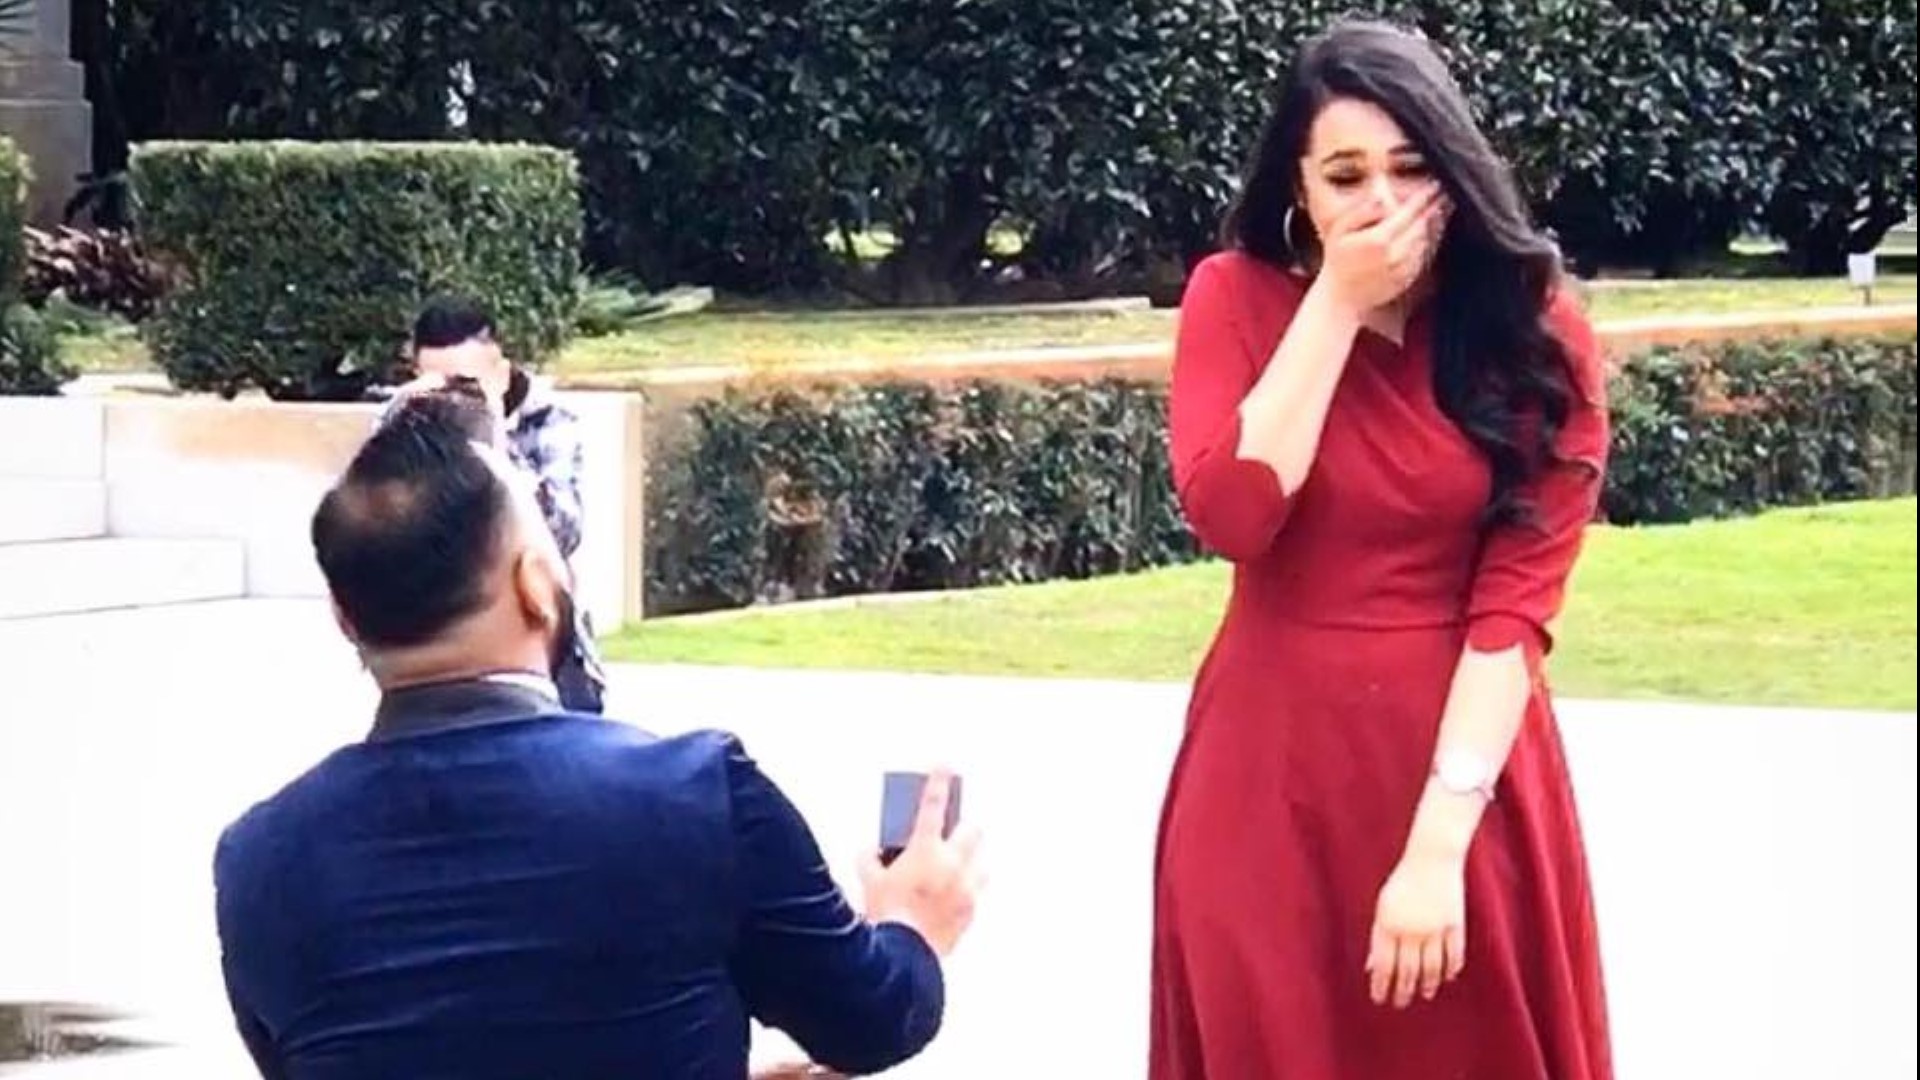 The State Capitol played host to an epic marriage proposal between Satnam Singh and Jyoti Banwait. It was an event that took months of planning on Singh's part but one that ultimately resulted in an amazing public proposal.